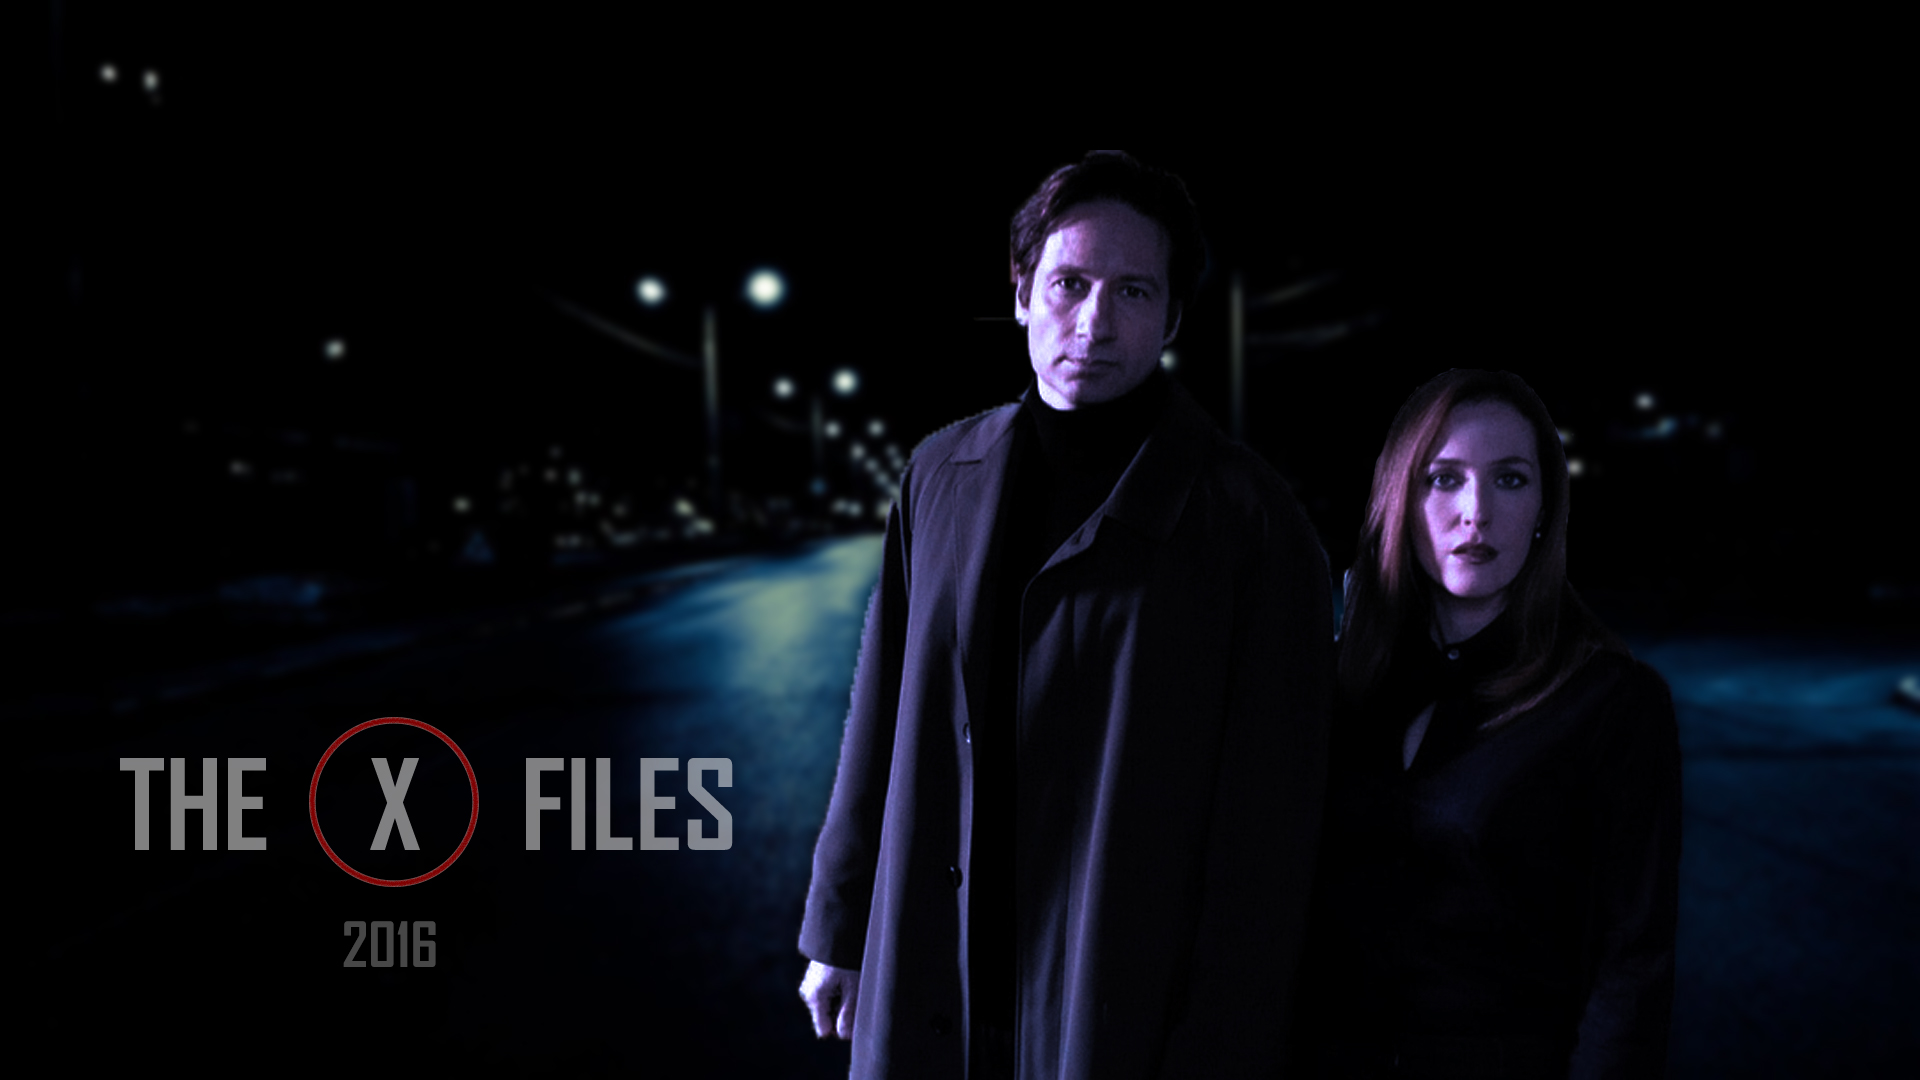 The X Files Wallpaper High Resolution And Quality